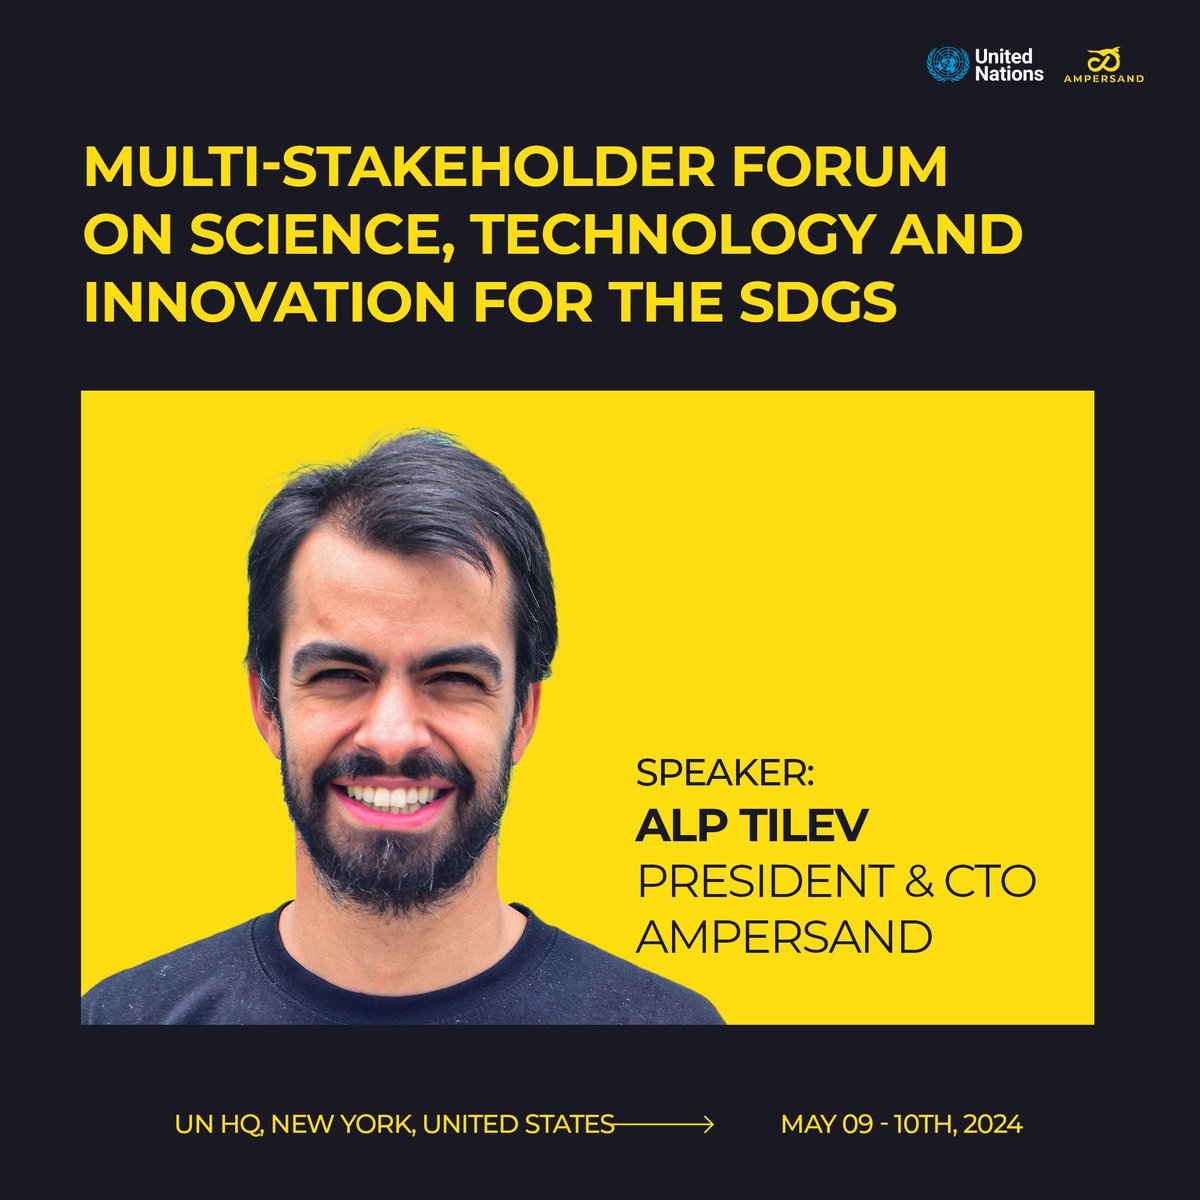 Our President & CTO, @ALP_TILEV, will be at the 9th #STIForum at the UN Headquarters in New York this 9-10th May 2024 to discuss #Ampersand's innovative solutions for eradicating poverty, combating climate change, & reinforcing the 2030 Agenda! #TECH4SDGS #SUSTDEV #UNCTAD #UNDESA